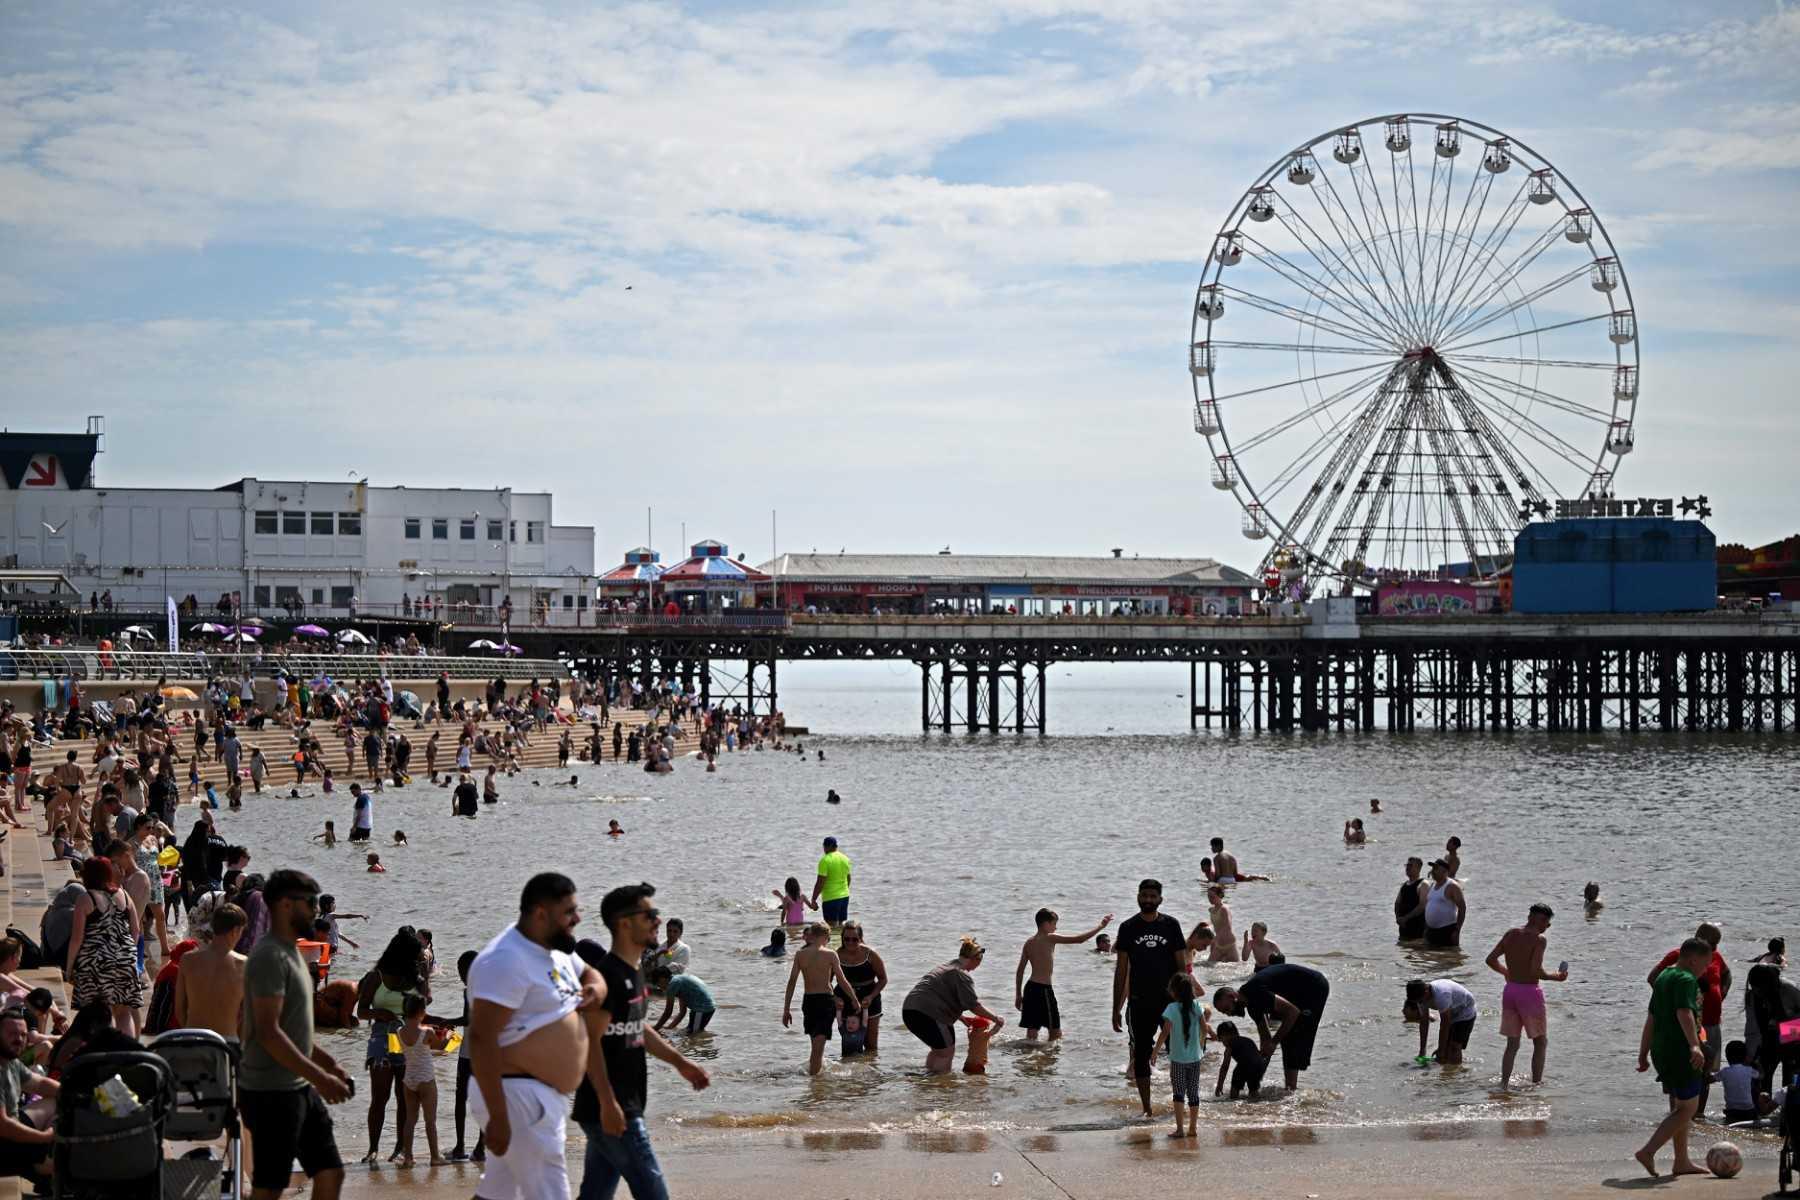 Beachgoers enjoy the sun and the sea at Blackpool, north west England on July 17. Photo: AFP